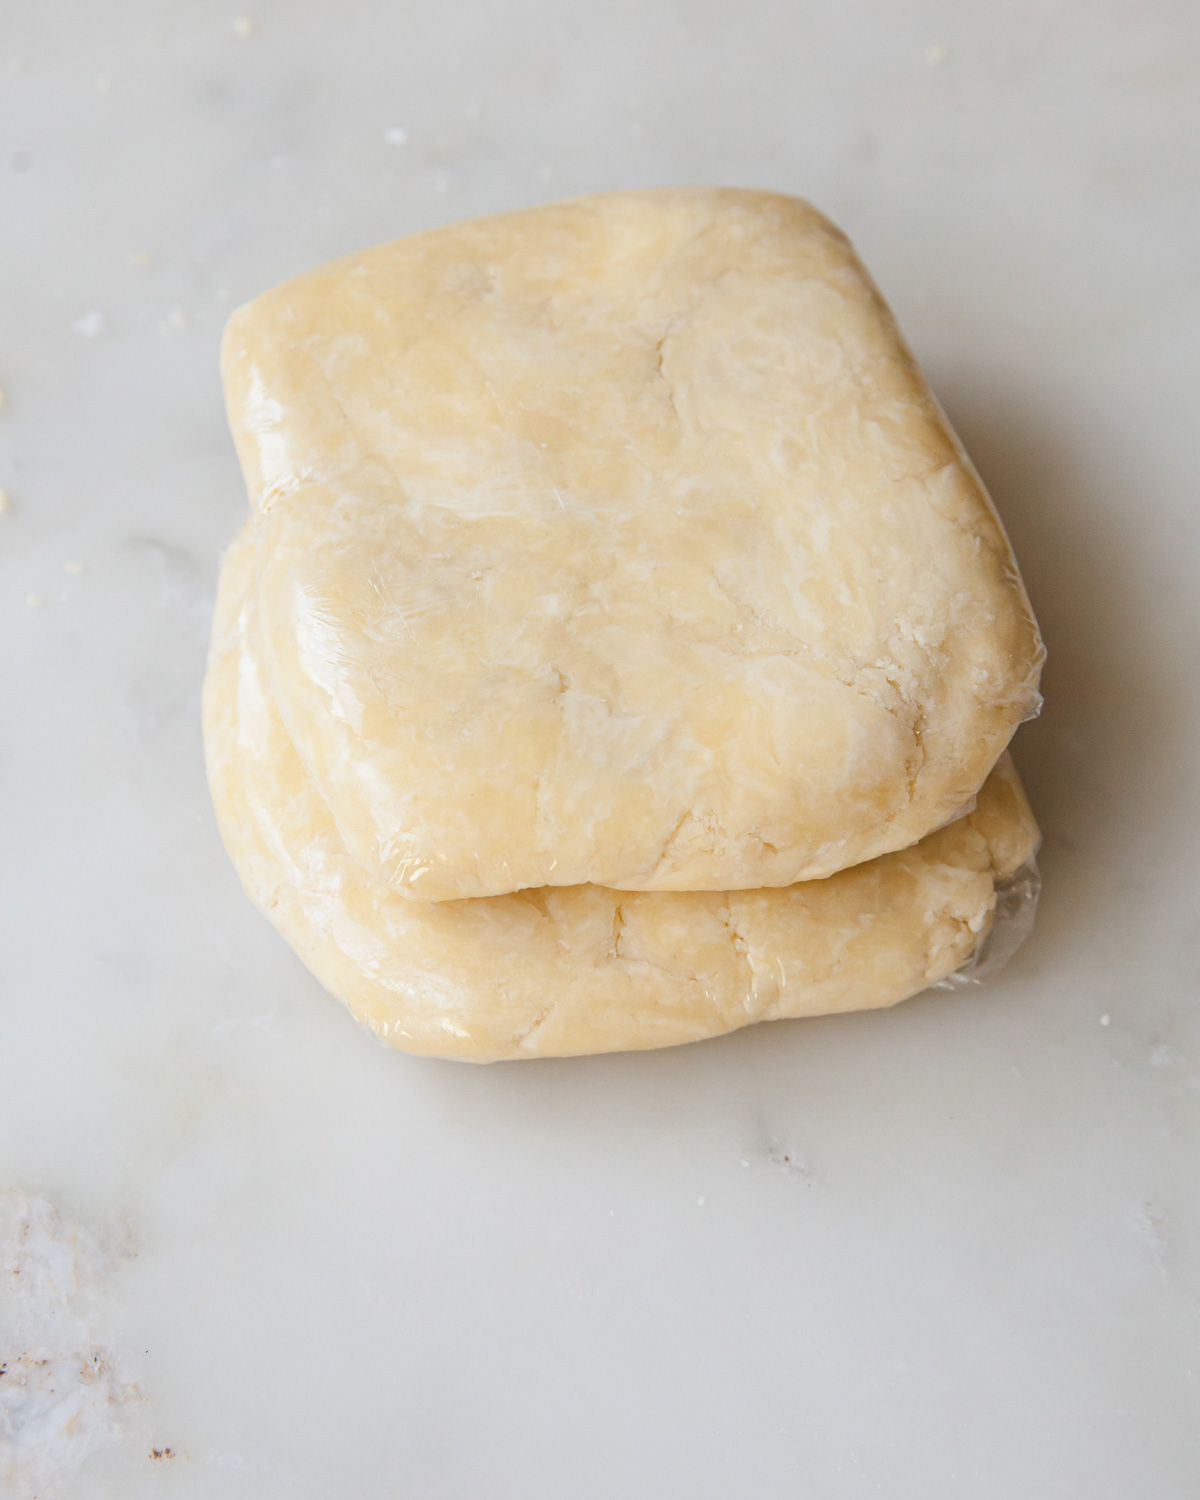 prepared pie dough by hand wrapped in plastic